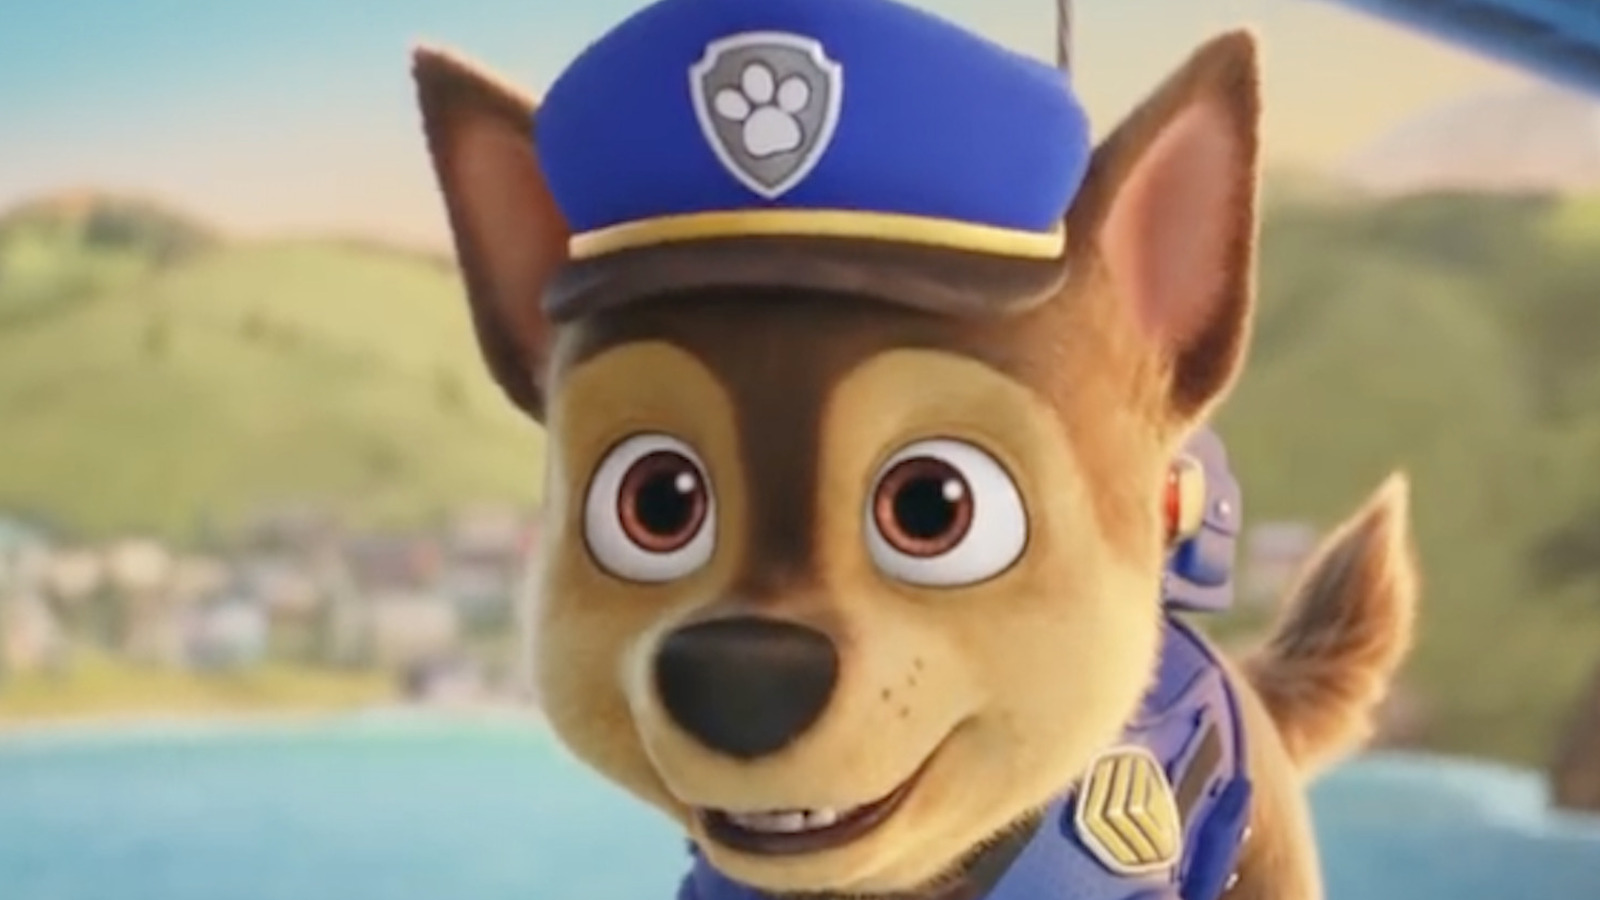 Review: 'PAW Patrol' needs quality control - The Rice Thresher